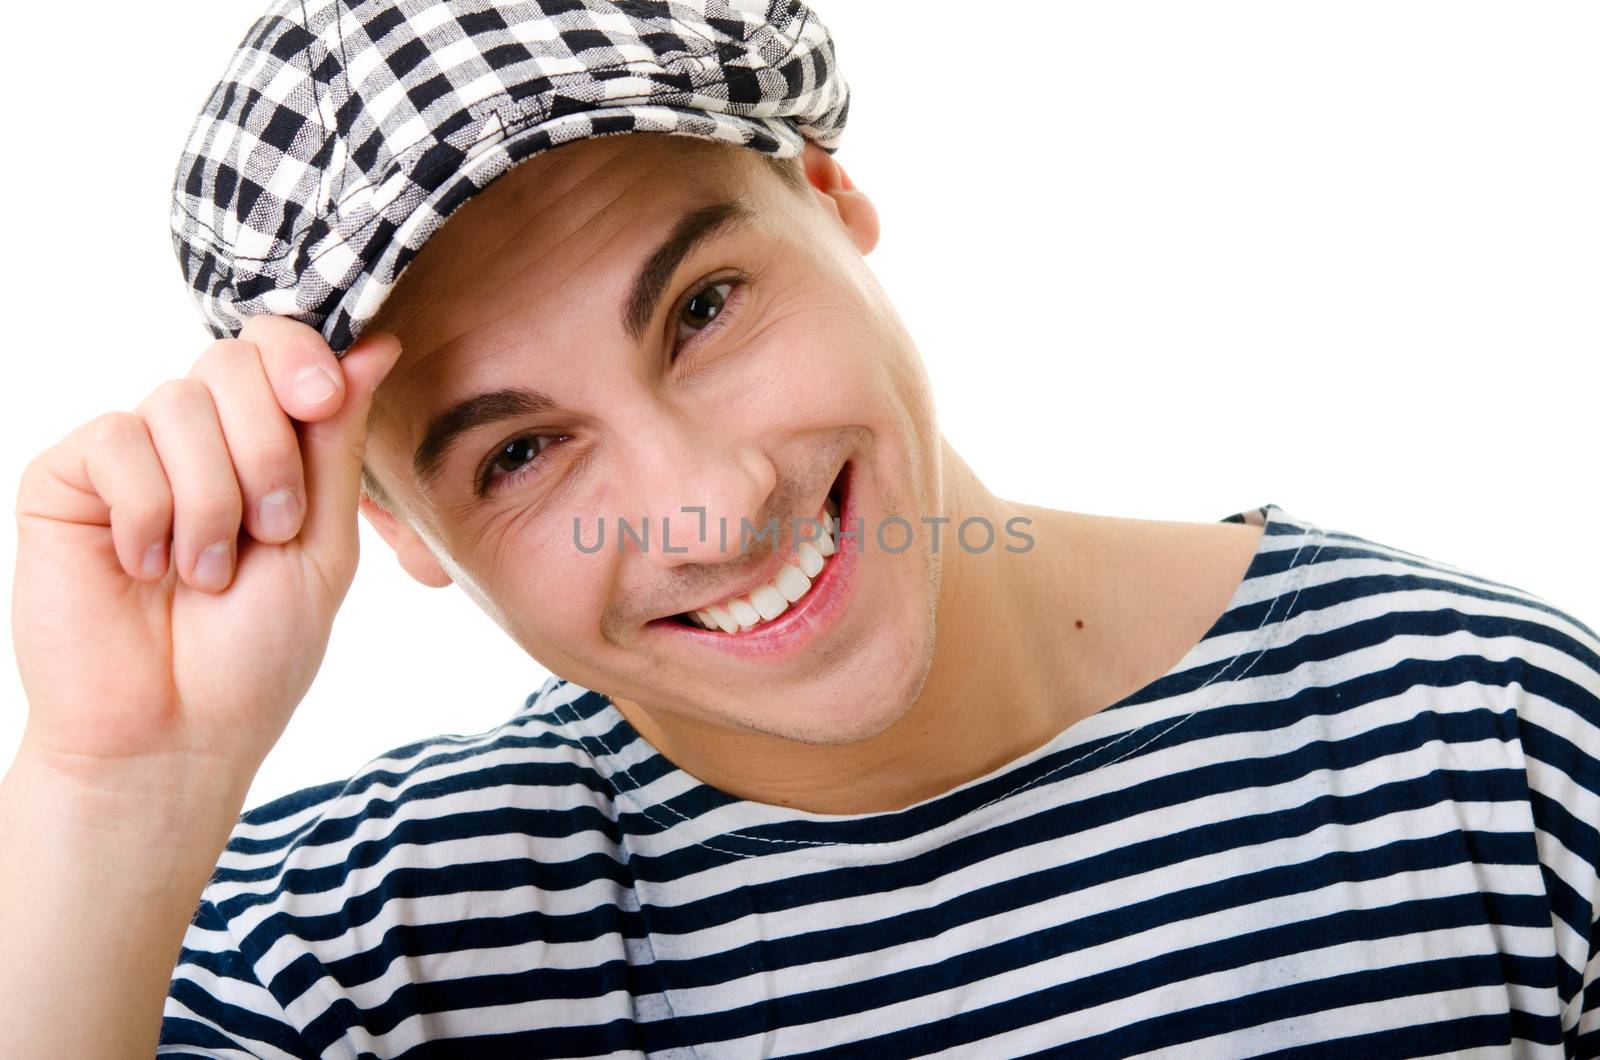 Handsome young man portrait in stylish striped dress and cap